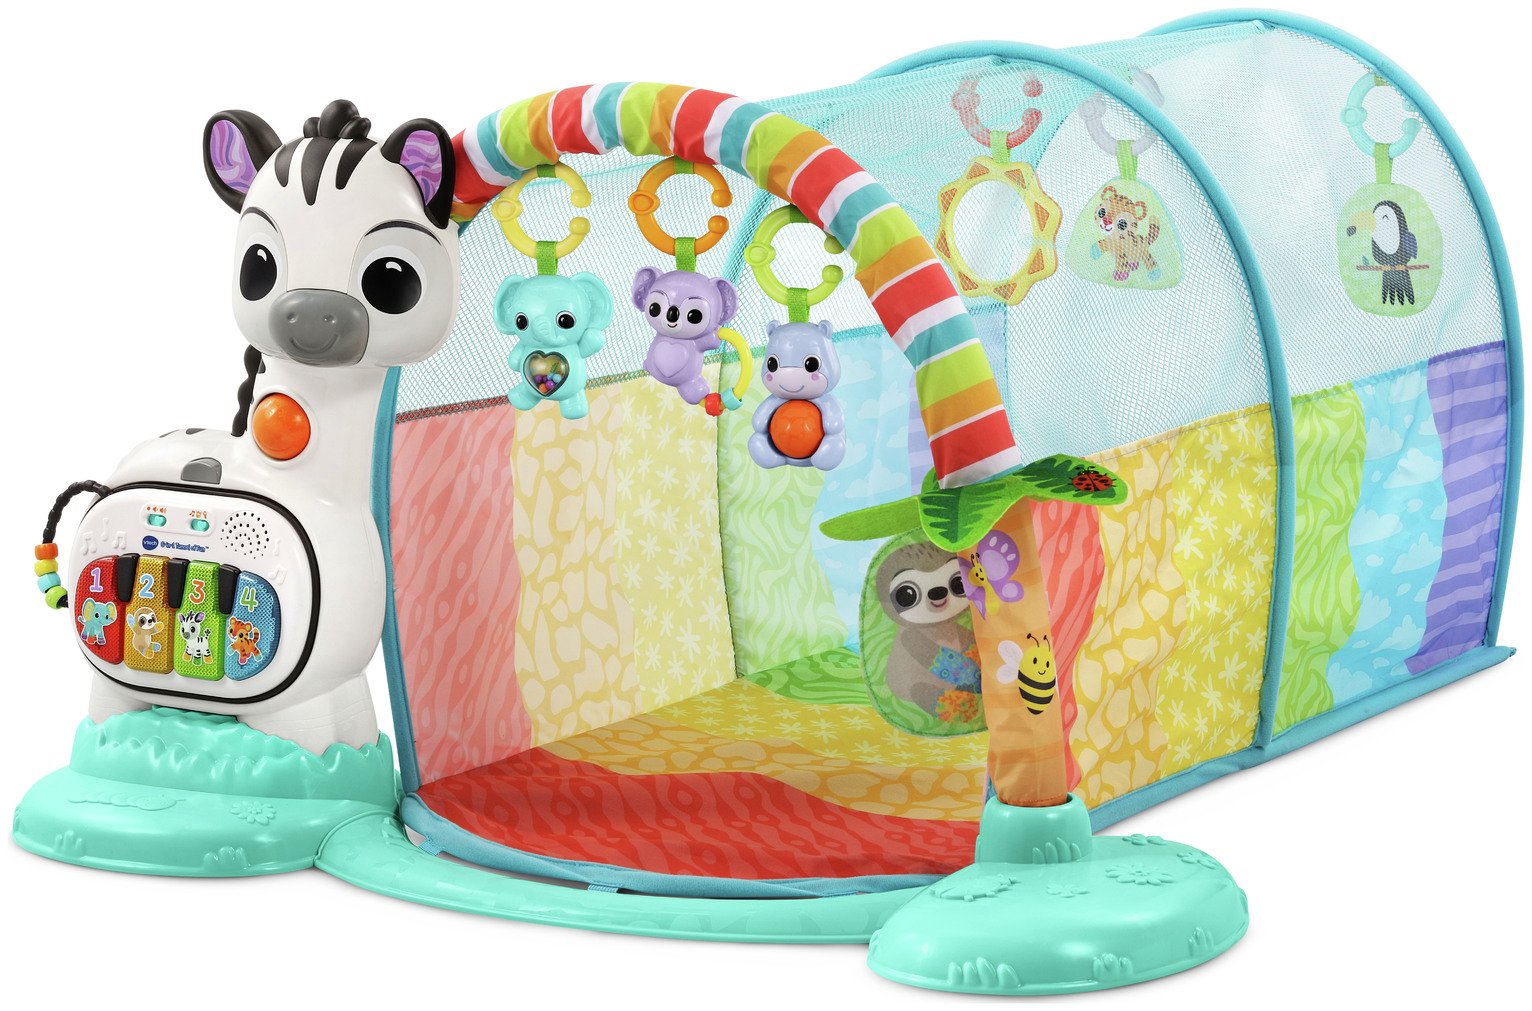 Vtech 6 In 1 Move & Grow Tunnel Gym